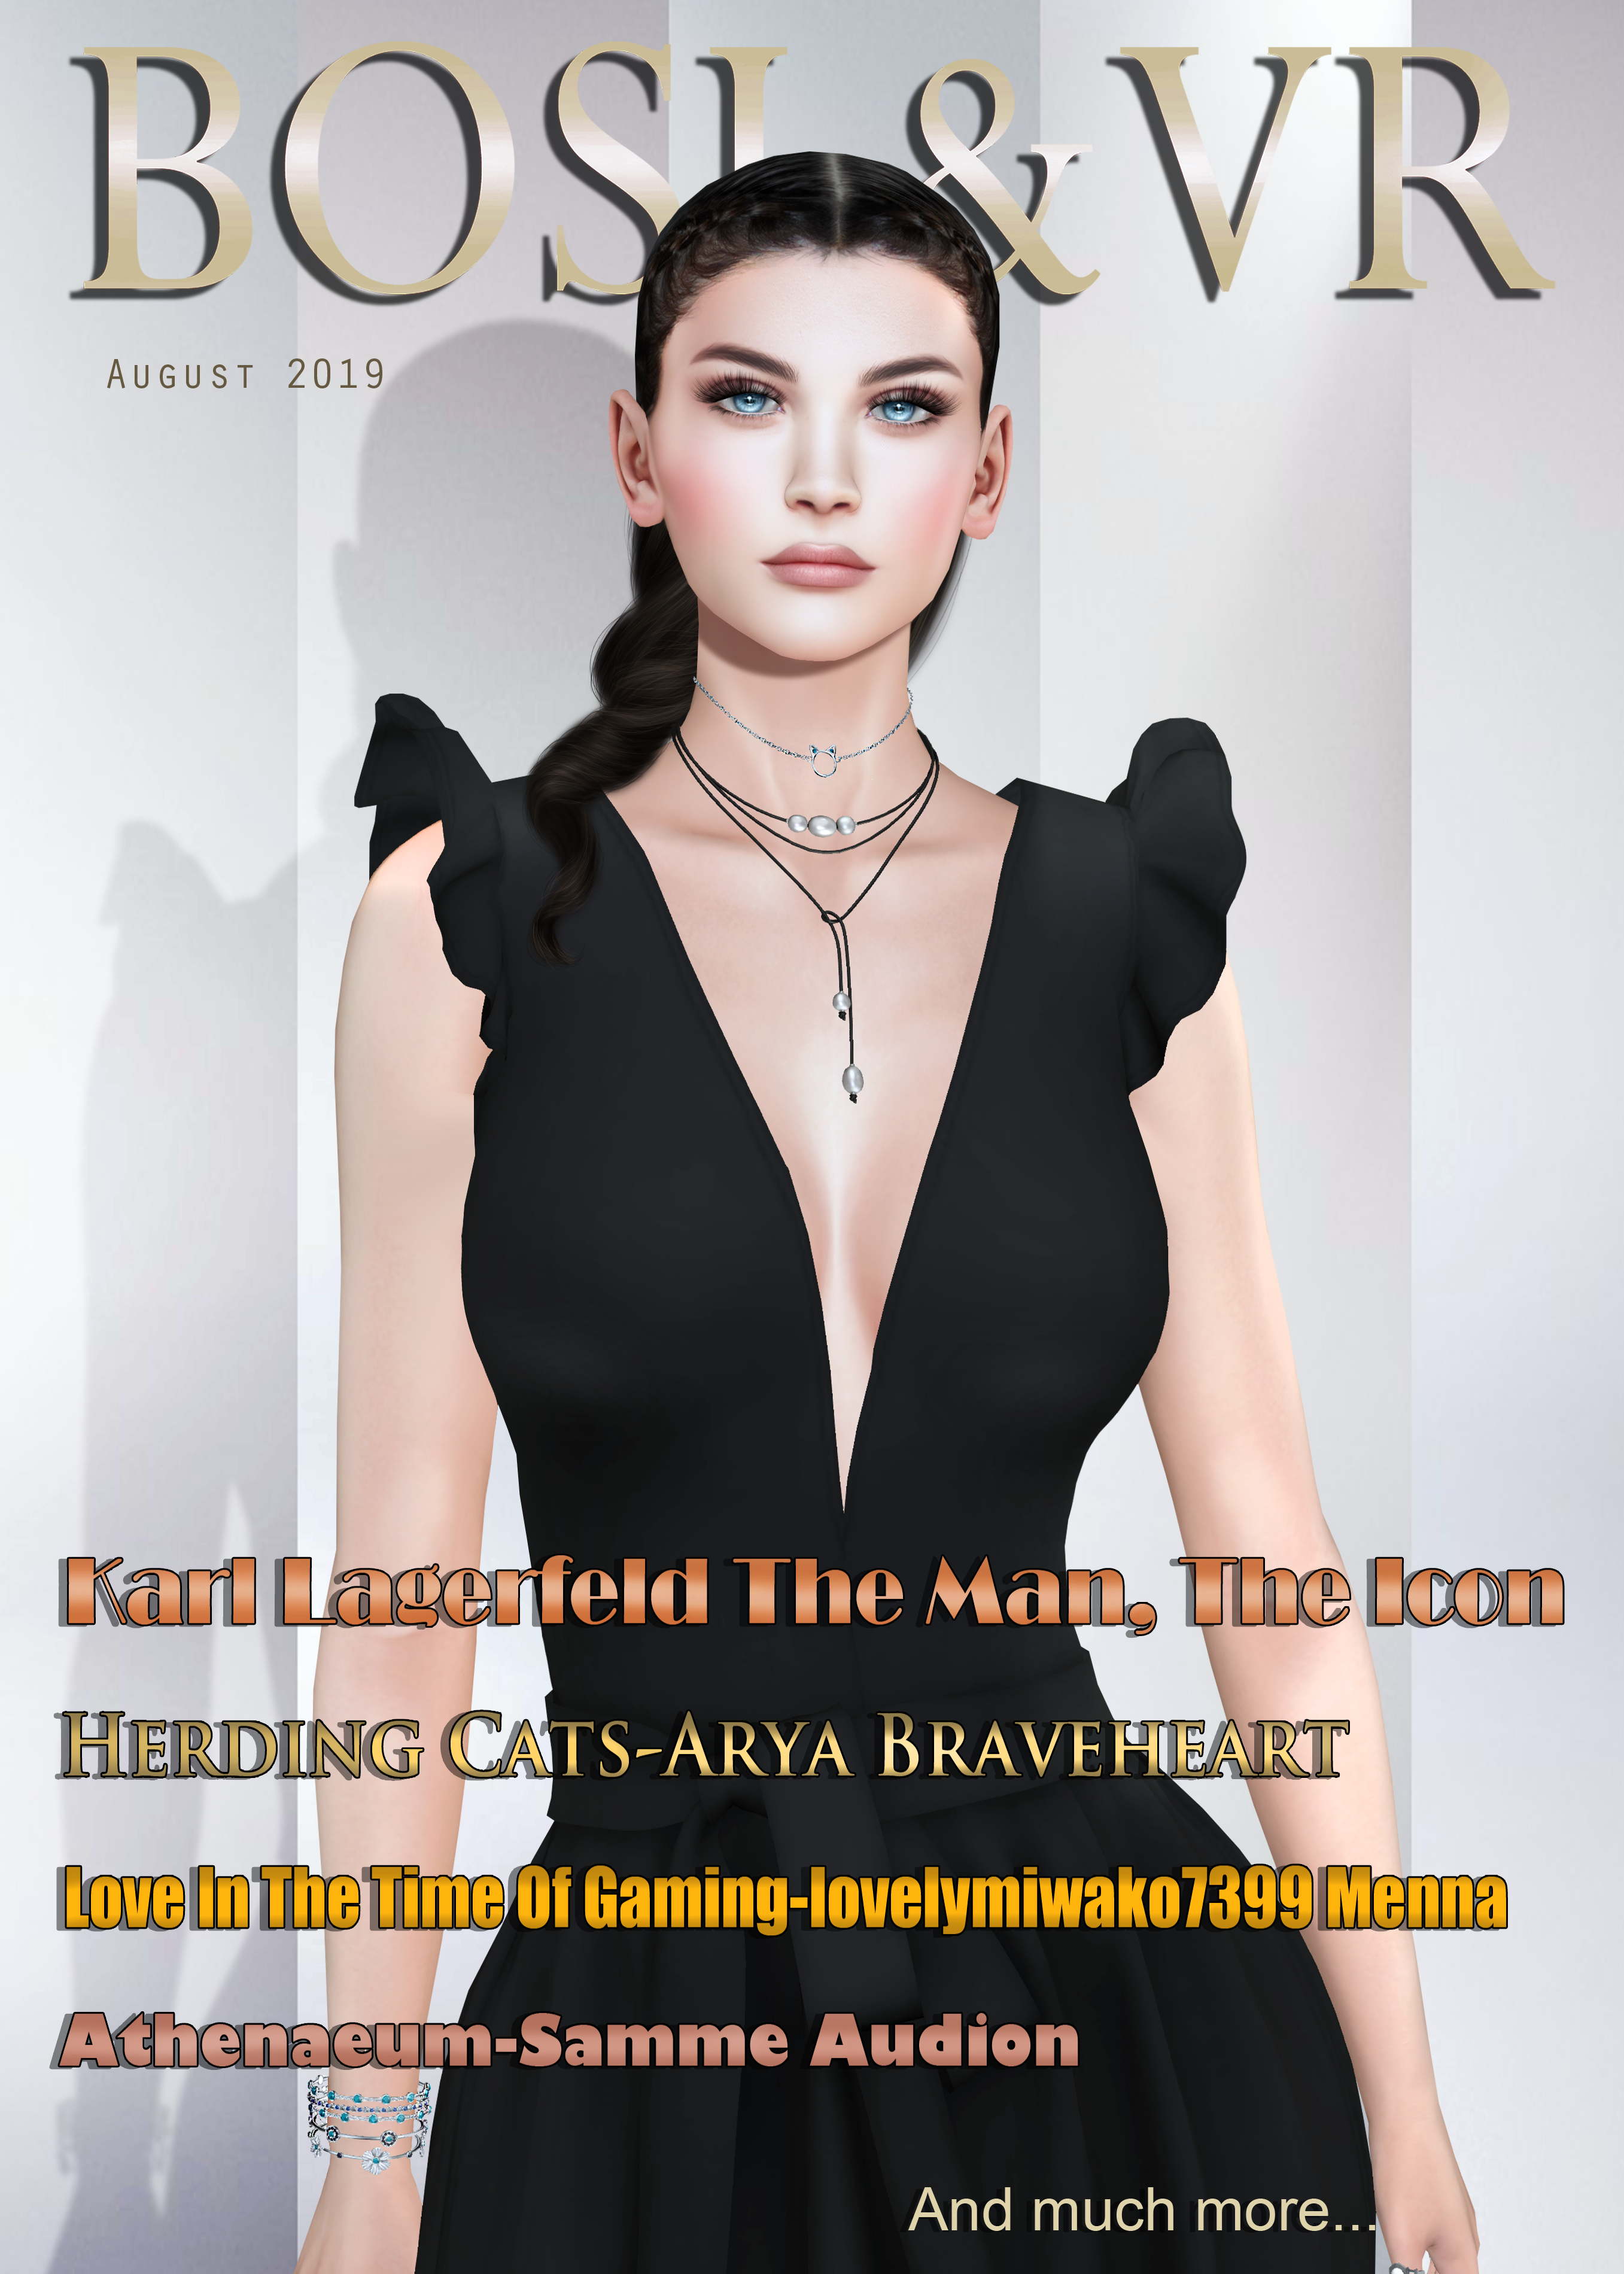 BOSL COVER August 2019